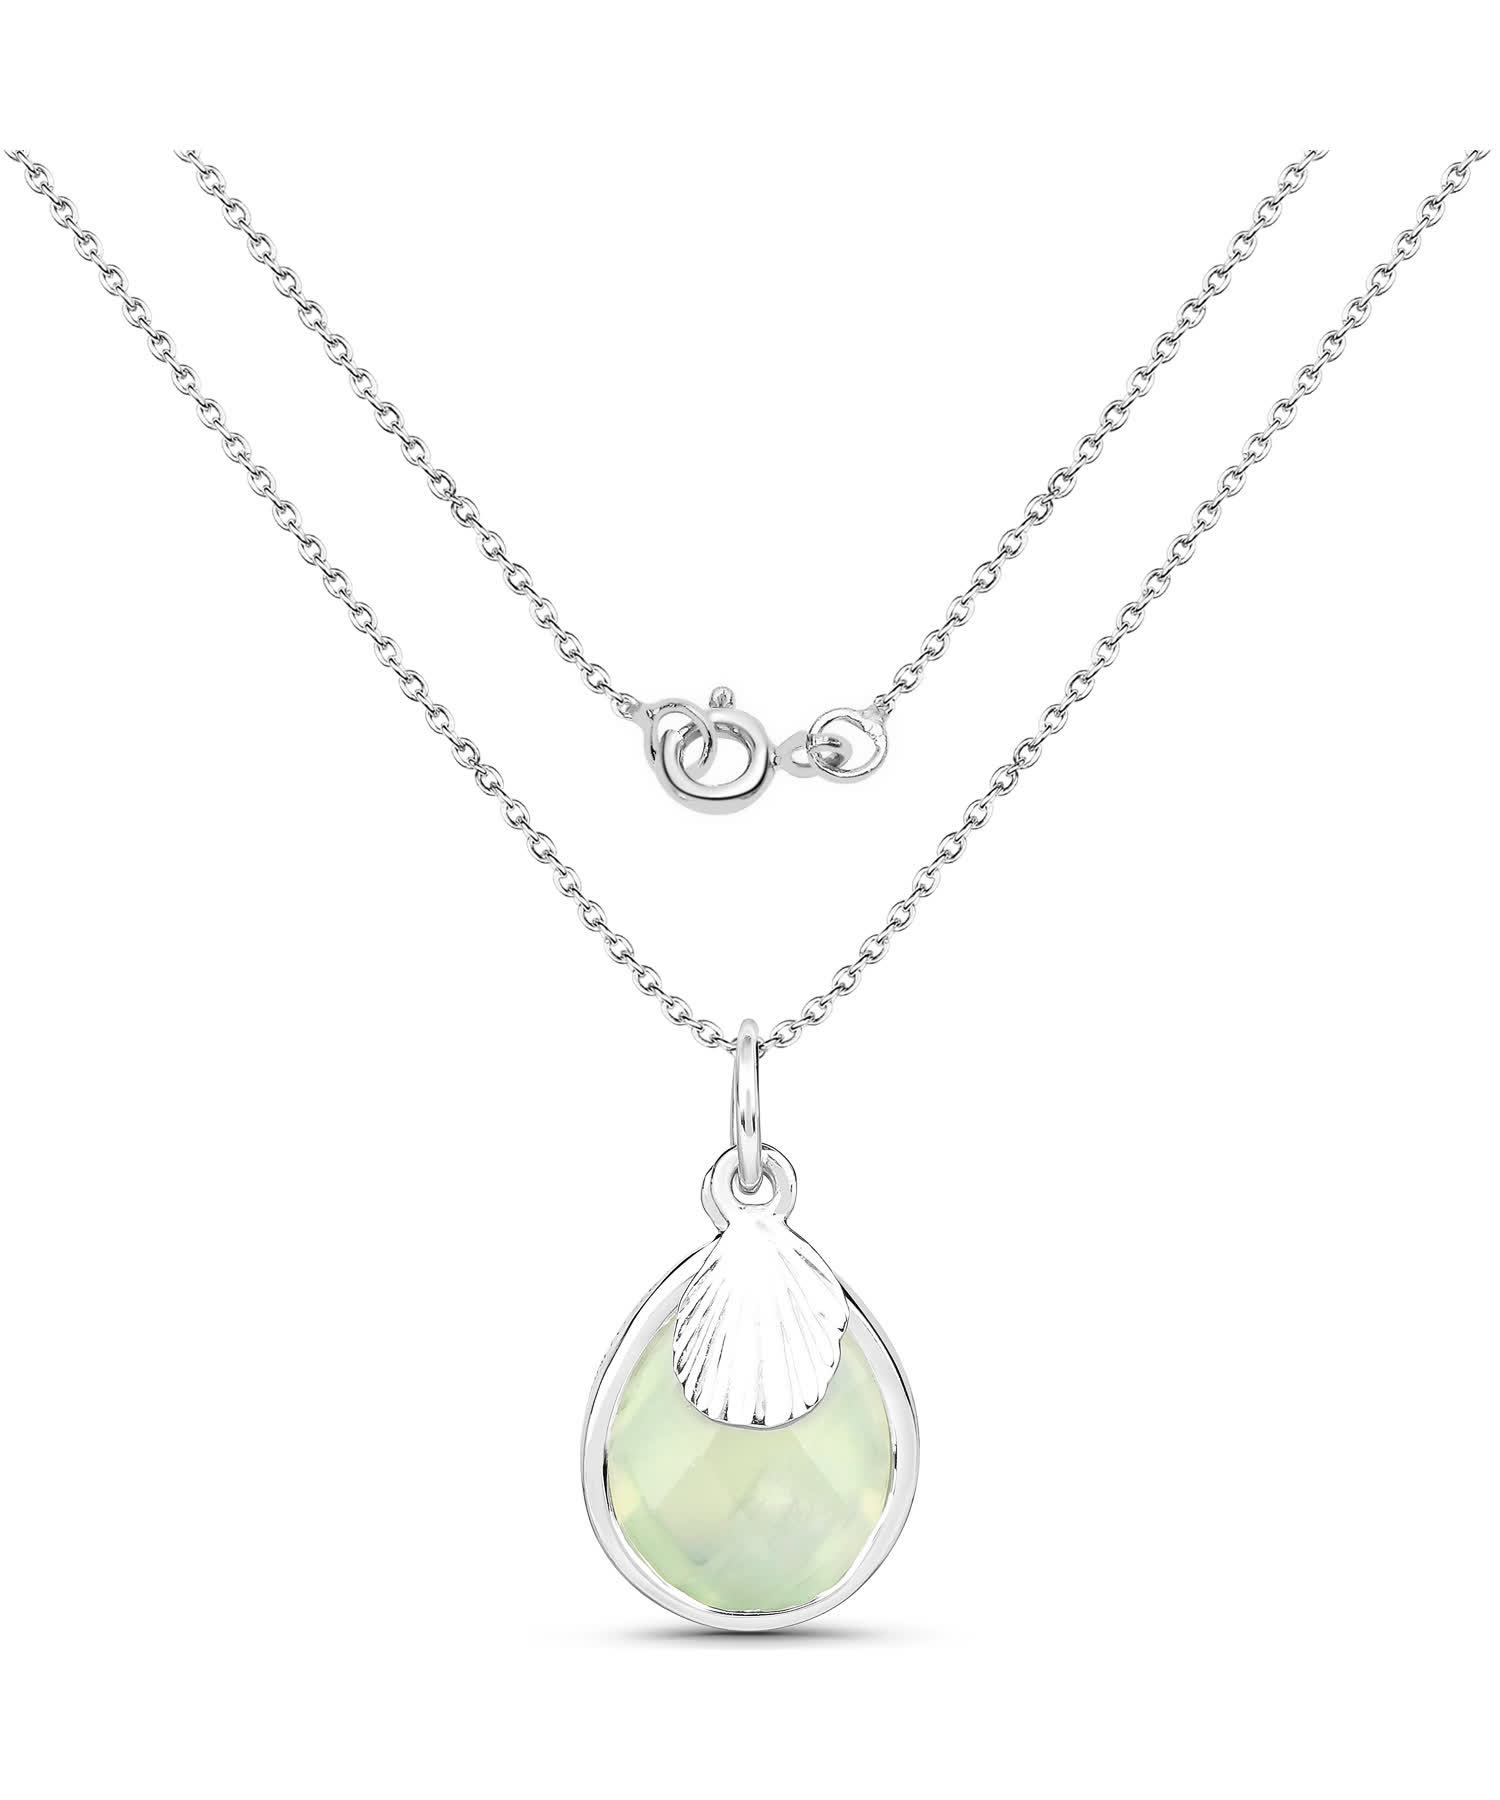 3.78ctw Natural Prehnite Rhodium Plated 925 Sterling Silver Drop Pendant With Chain View 2